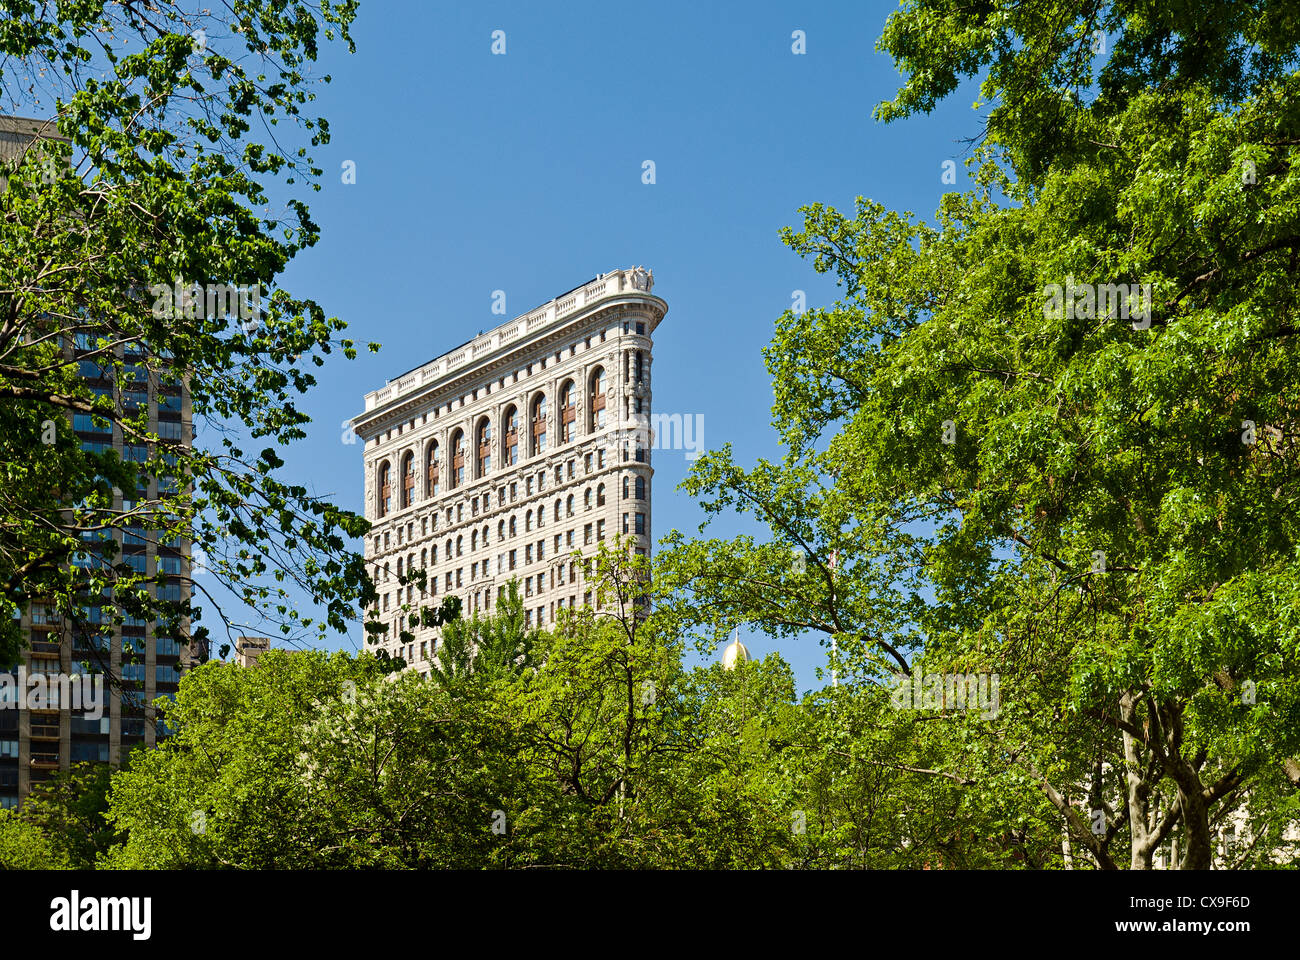 The Flatiron Building and Madison Square Park, 23rd Street, New York City. Stock Photo